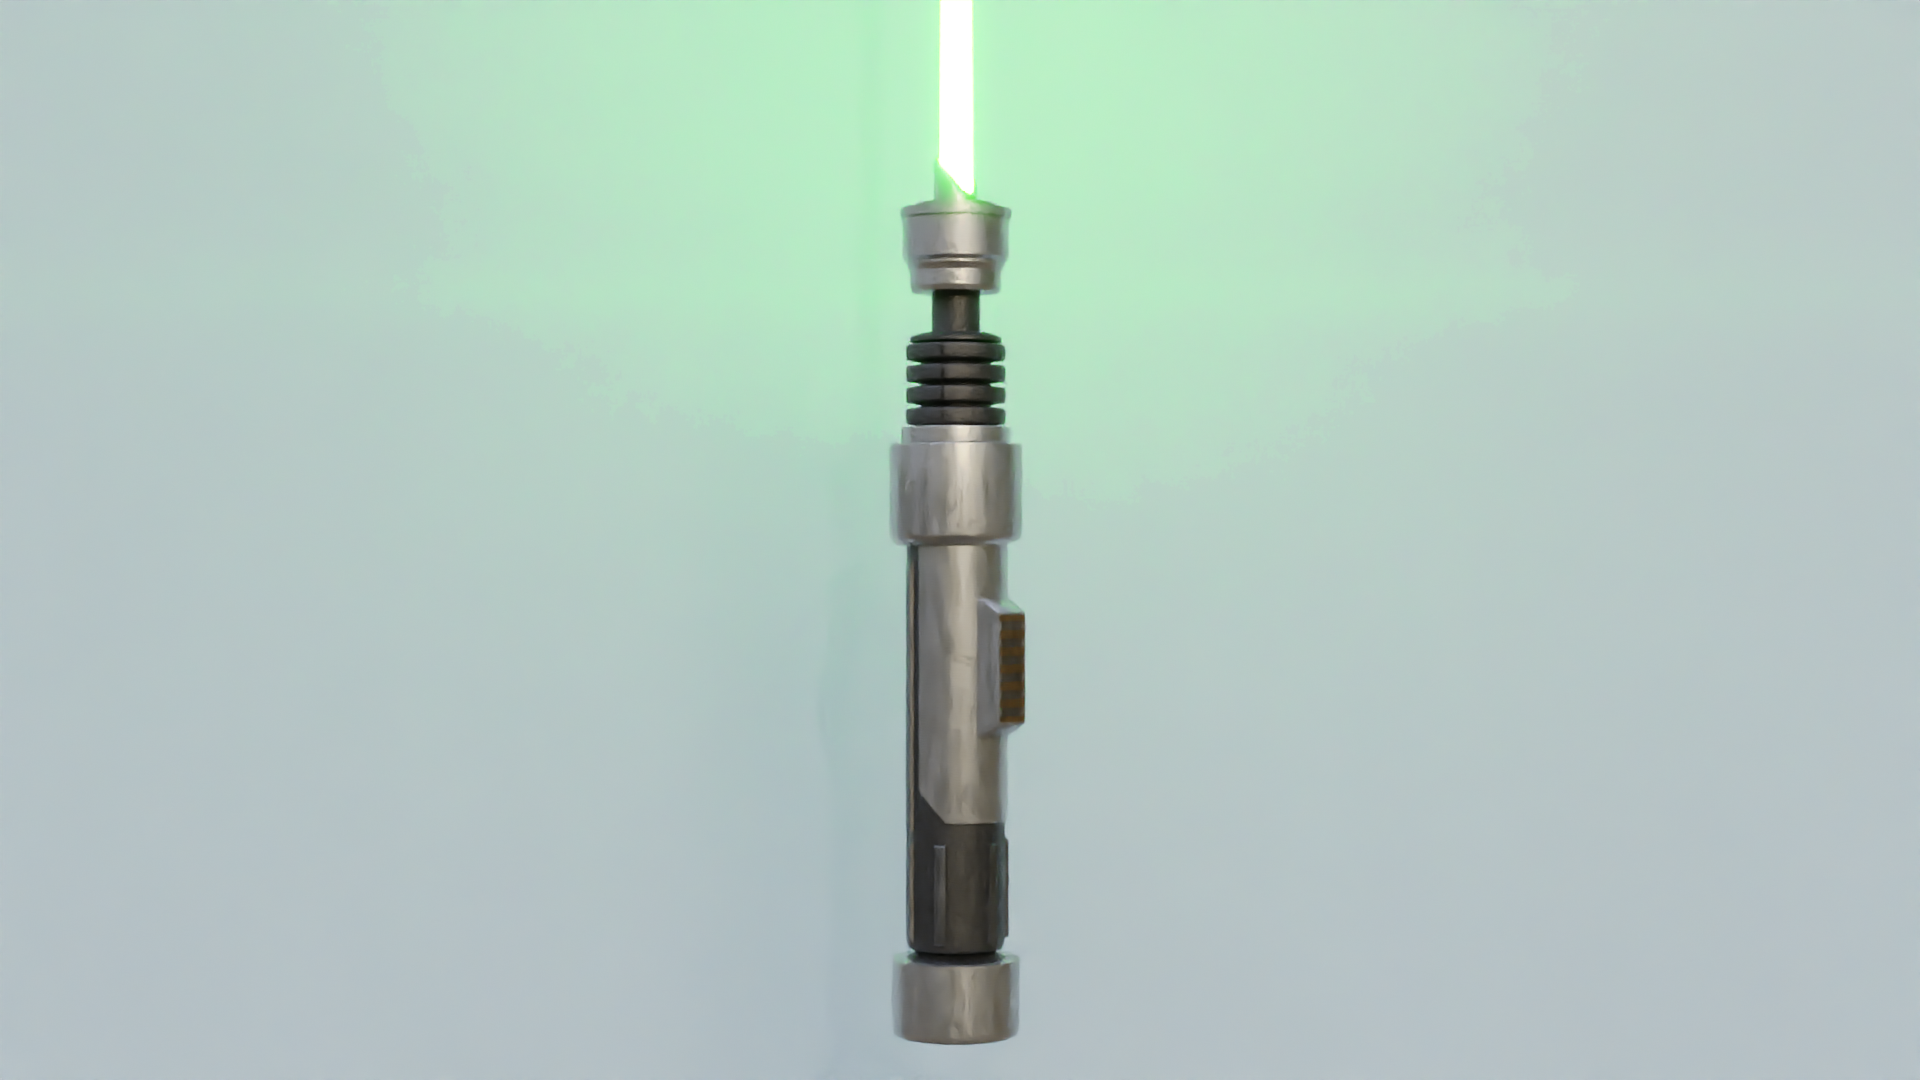 Lightsabers (Star Wars Rebels) preview image 3